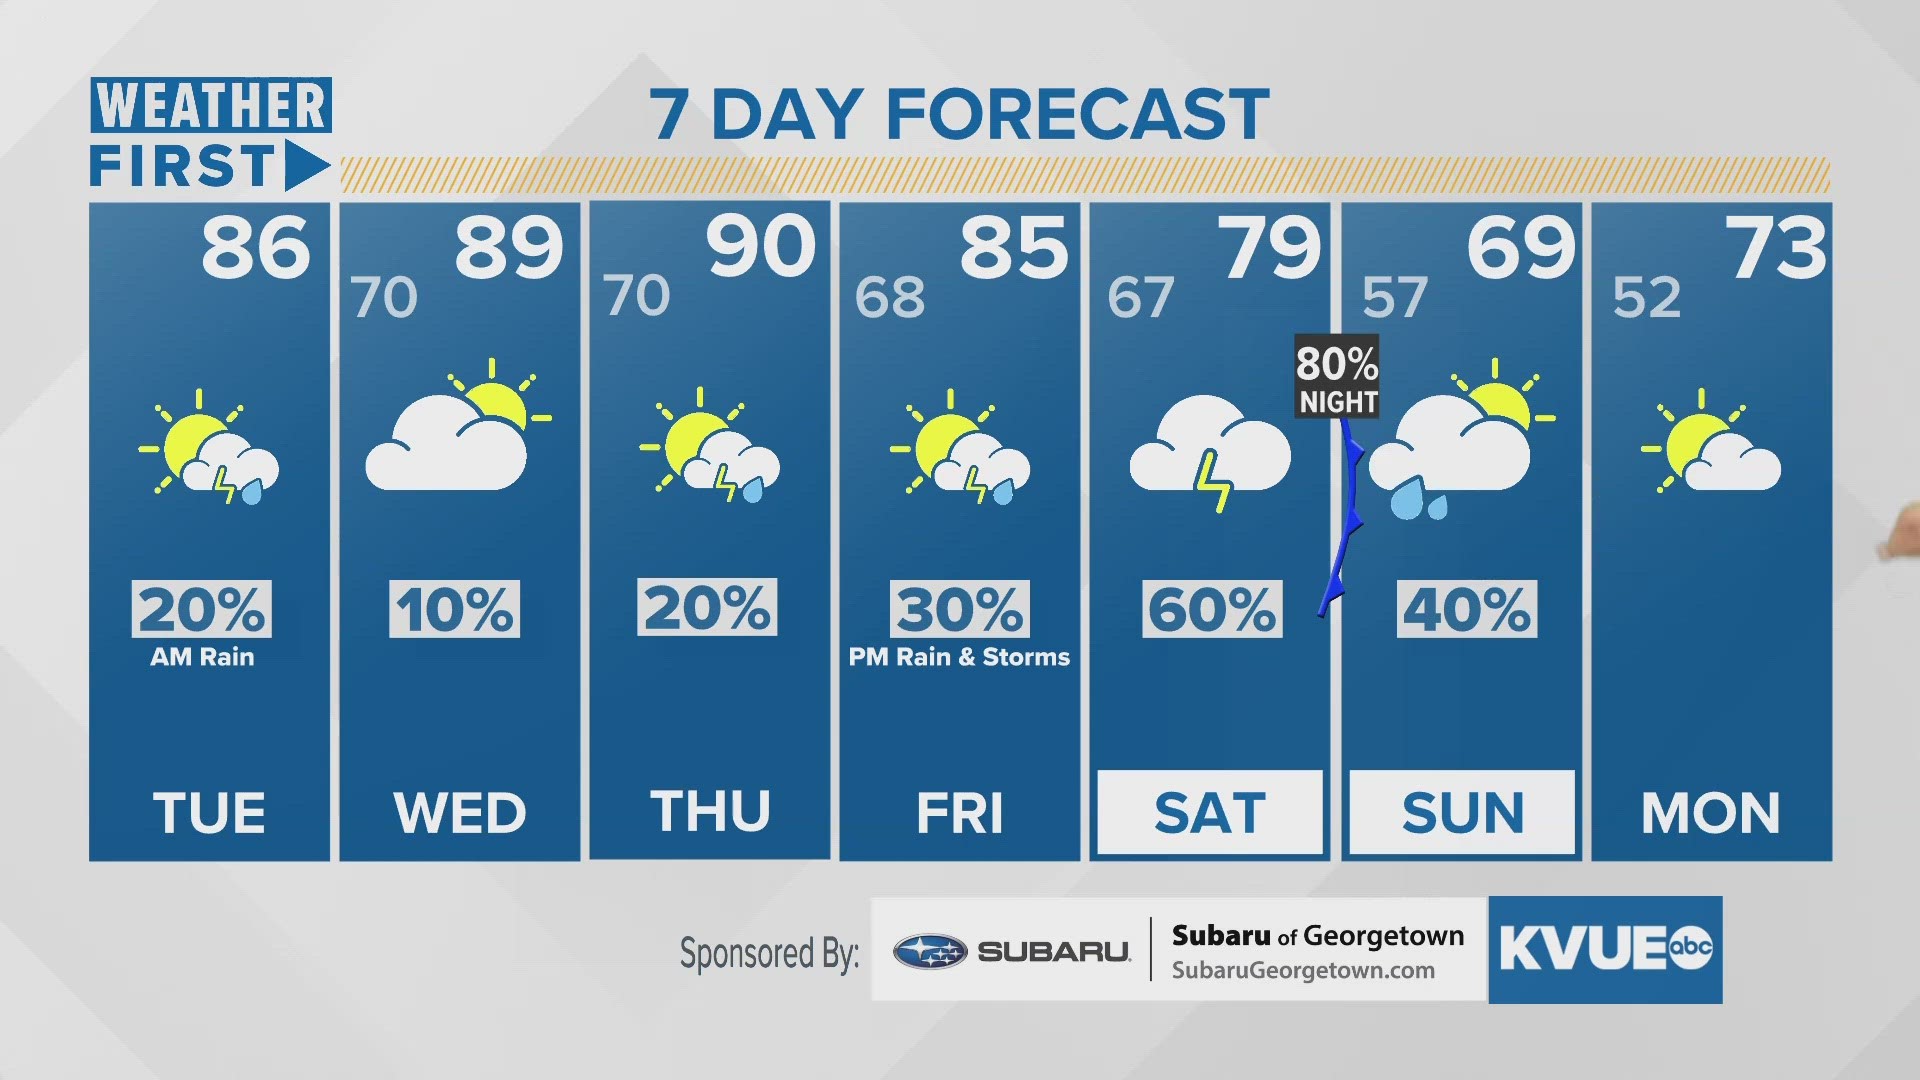 Hot and humid through the end of the week. Tracking significant rain chances for Saturday night and Sunday morning.